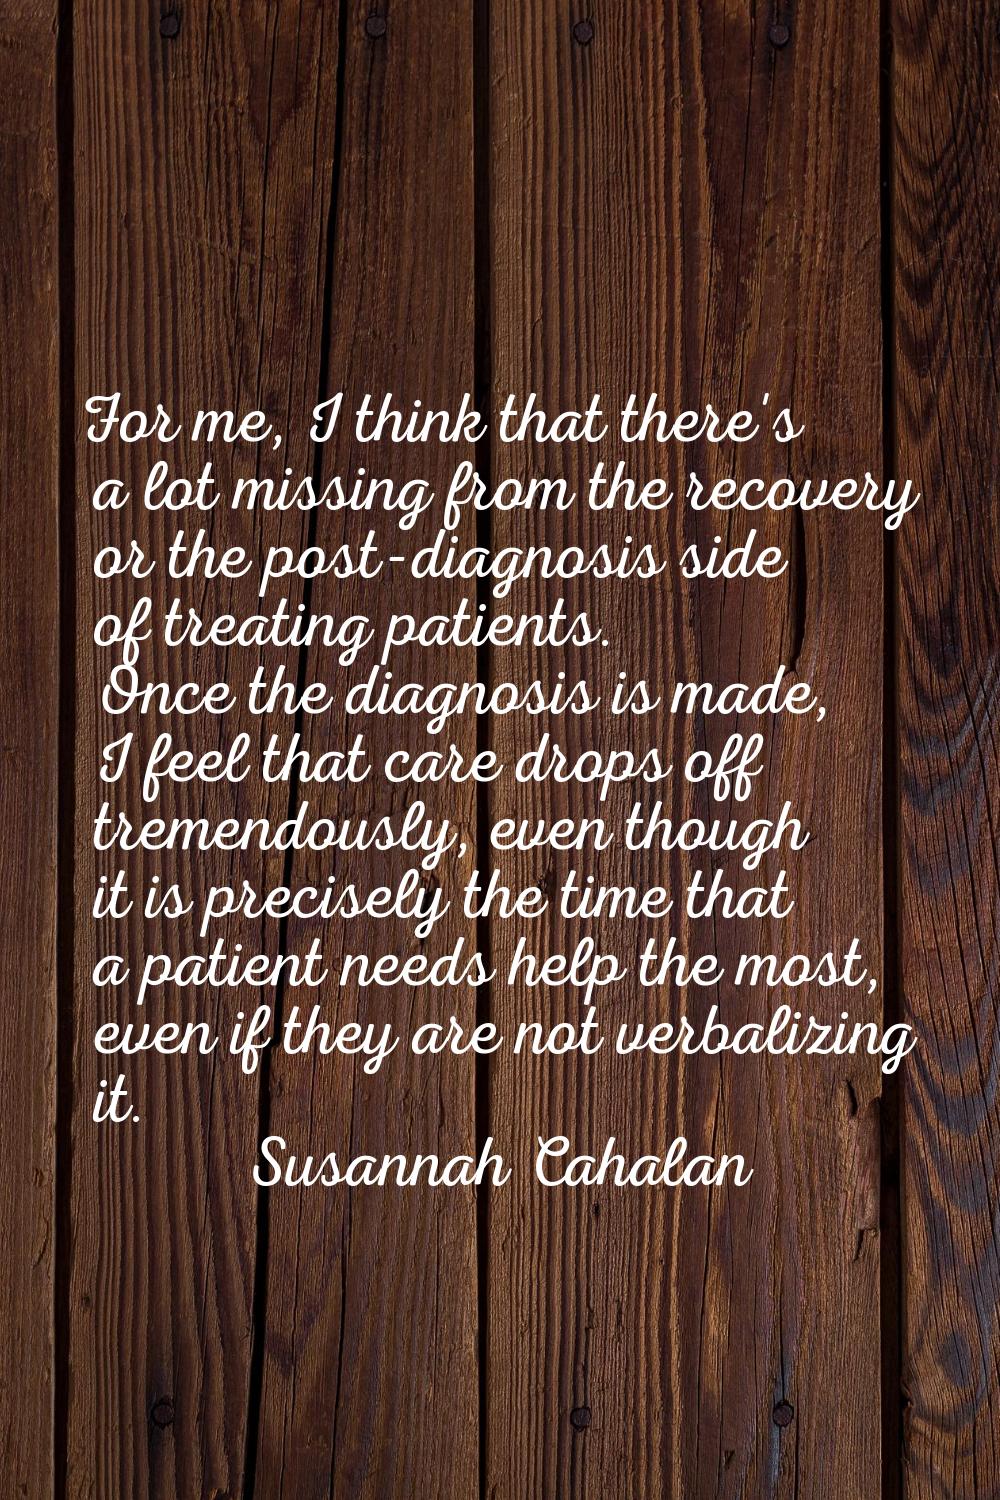 For me, I think that there's a lot missing from the recovery or the post-diagnosis side of treating